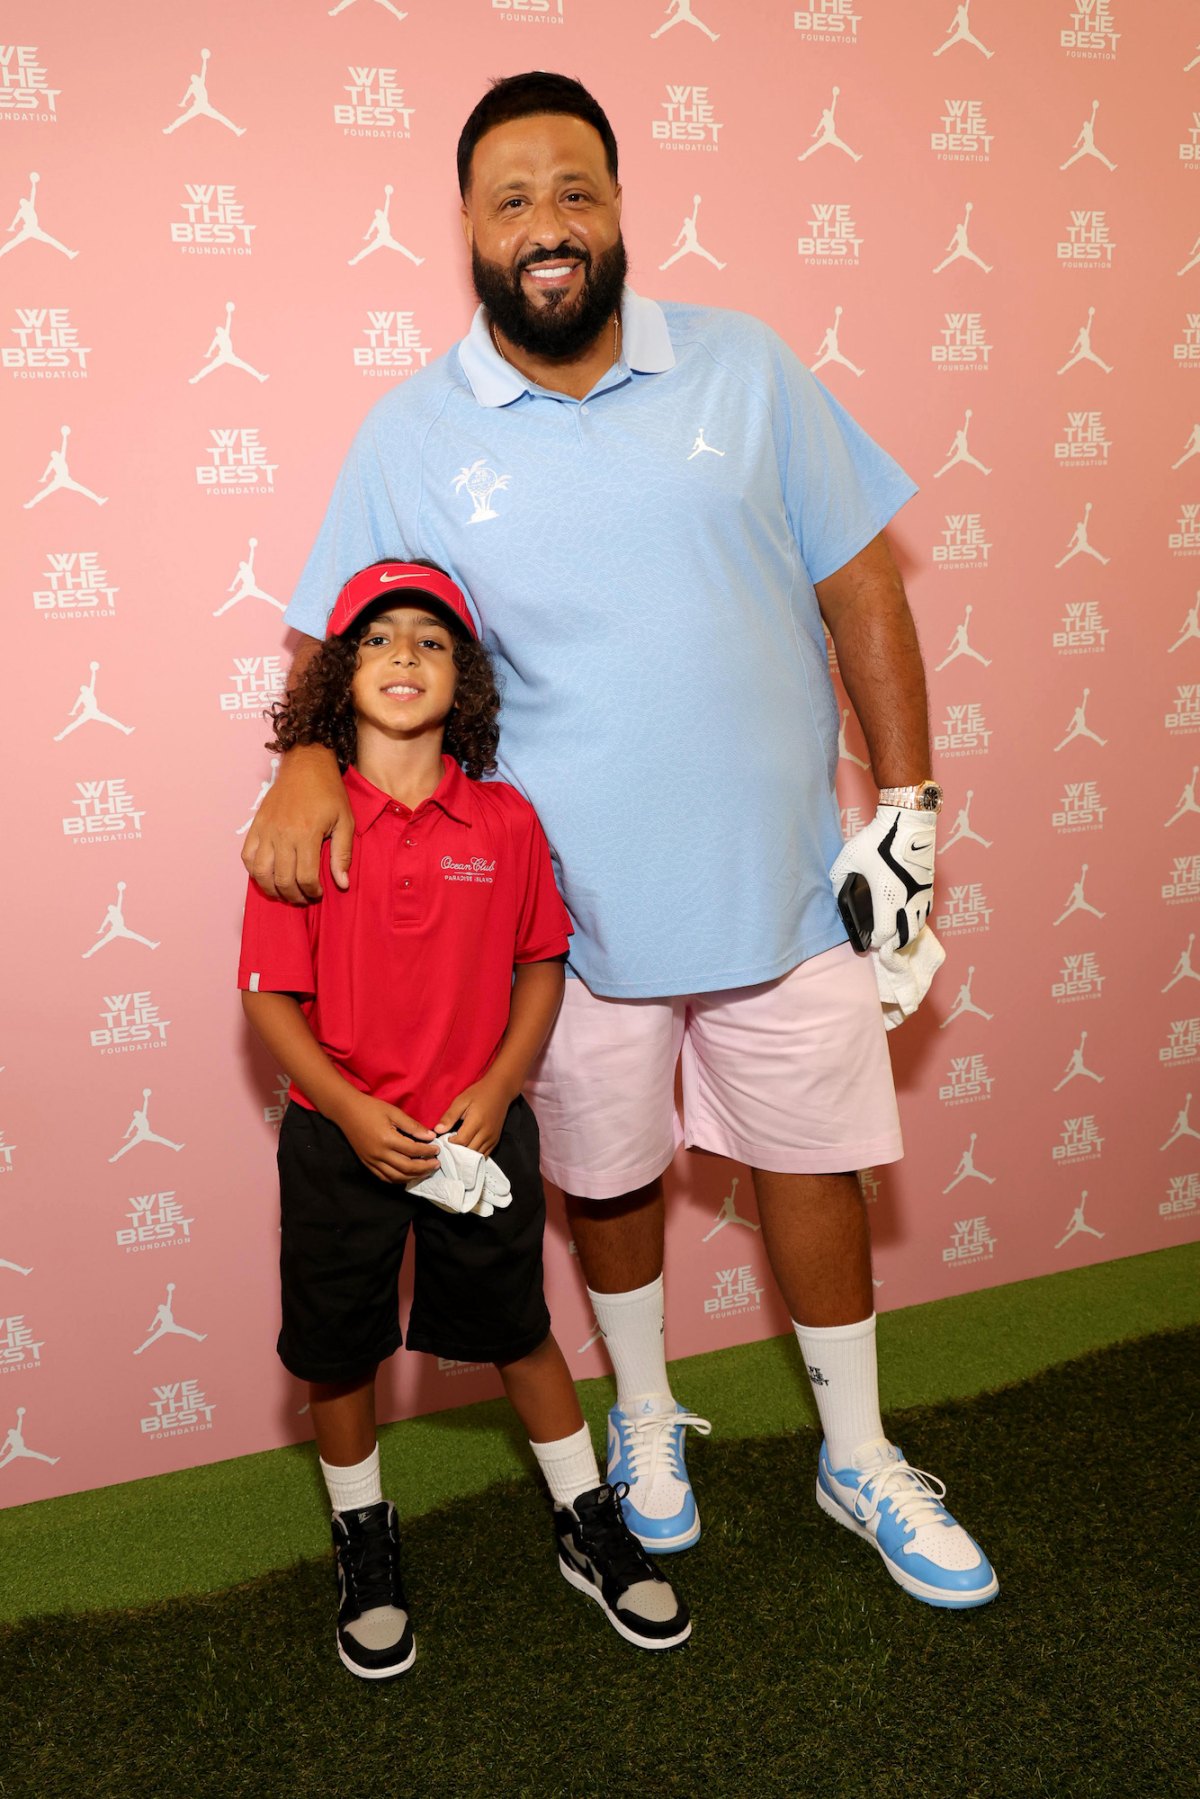 DJ Khaled lifts lid on new-found love of golf from 15lb weight